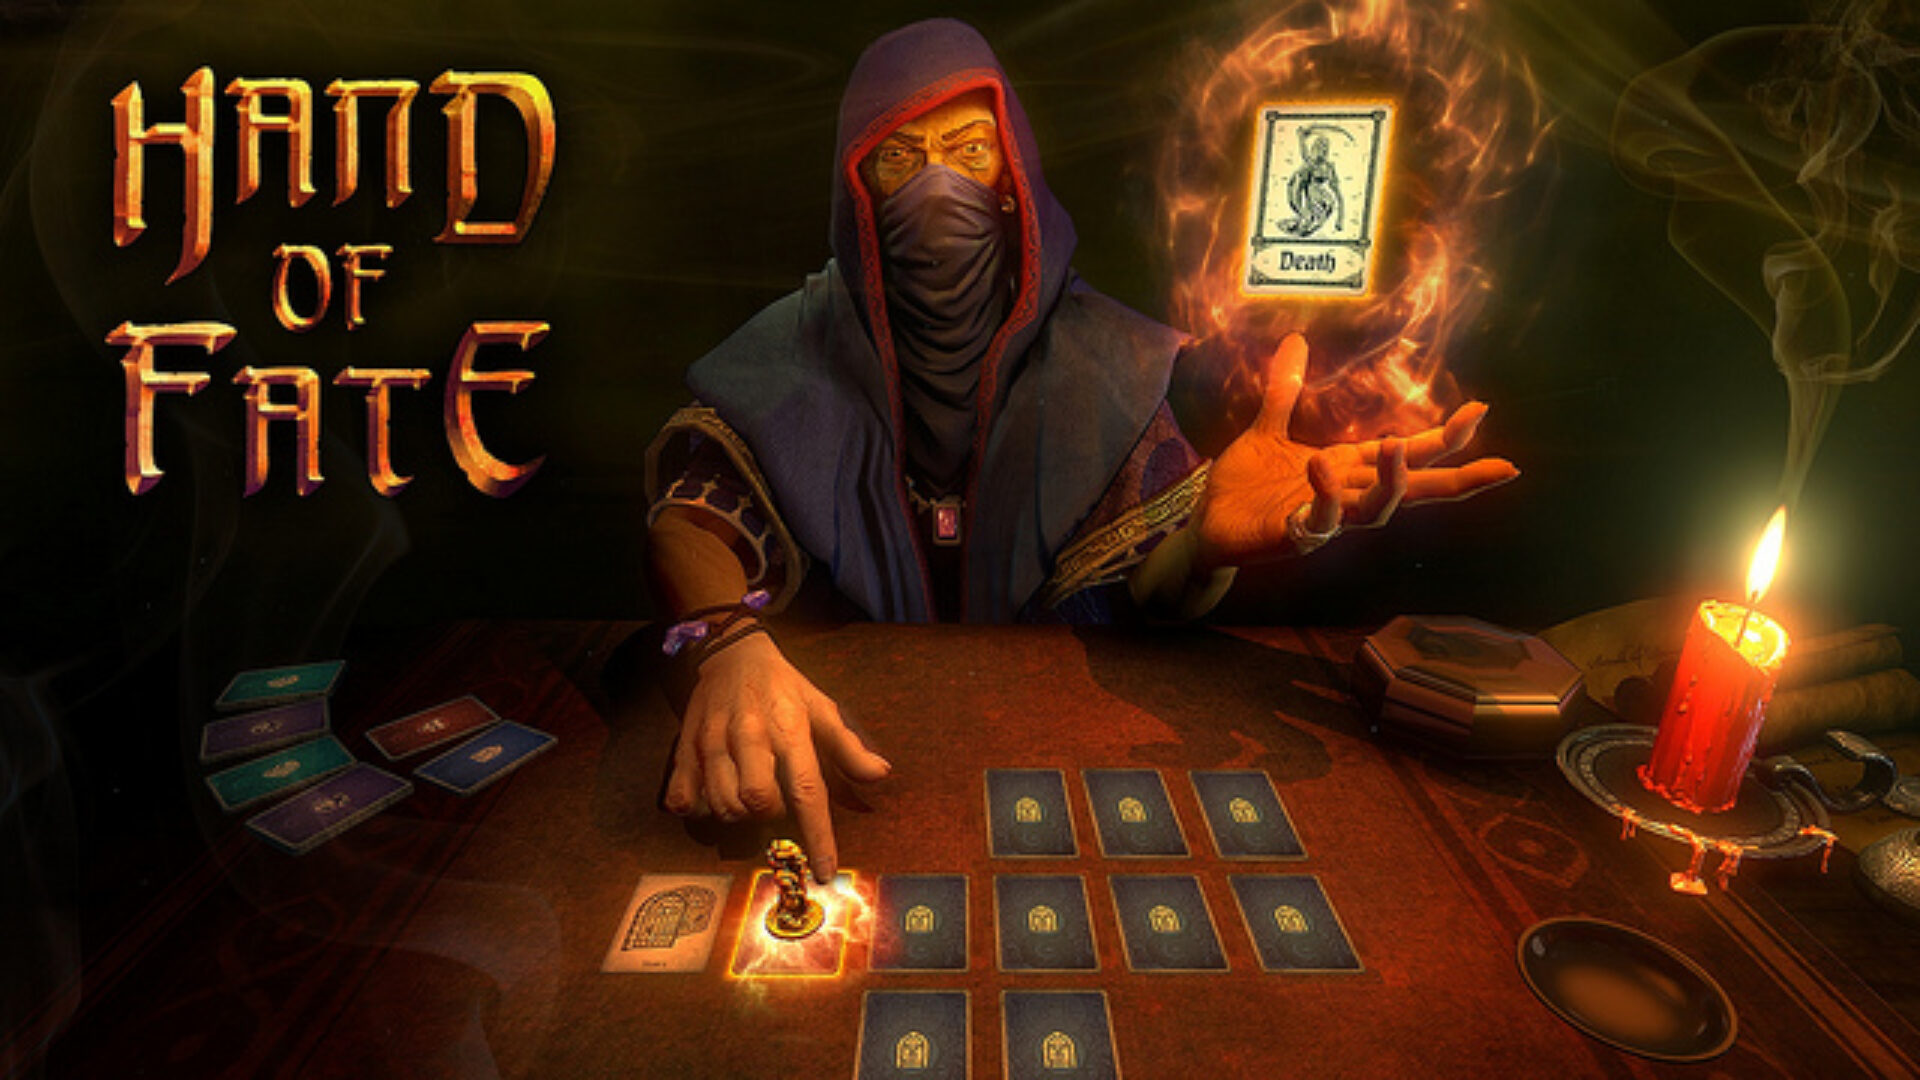 Hand of Fate Steam Code Giveaway